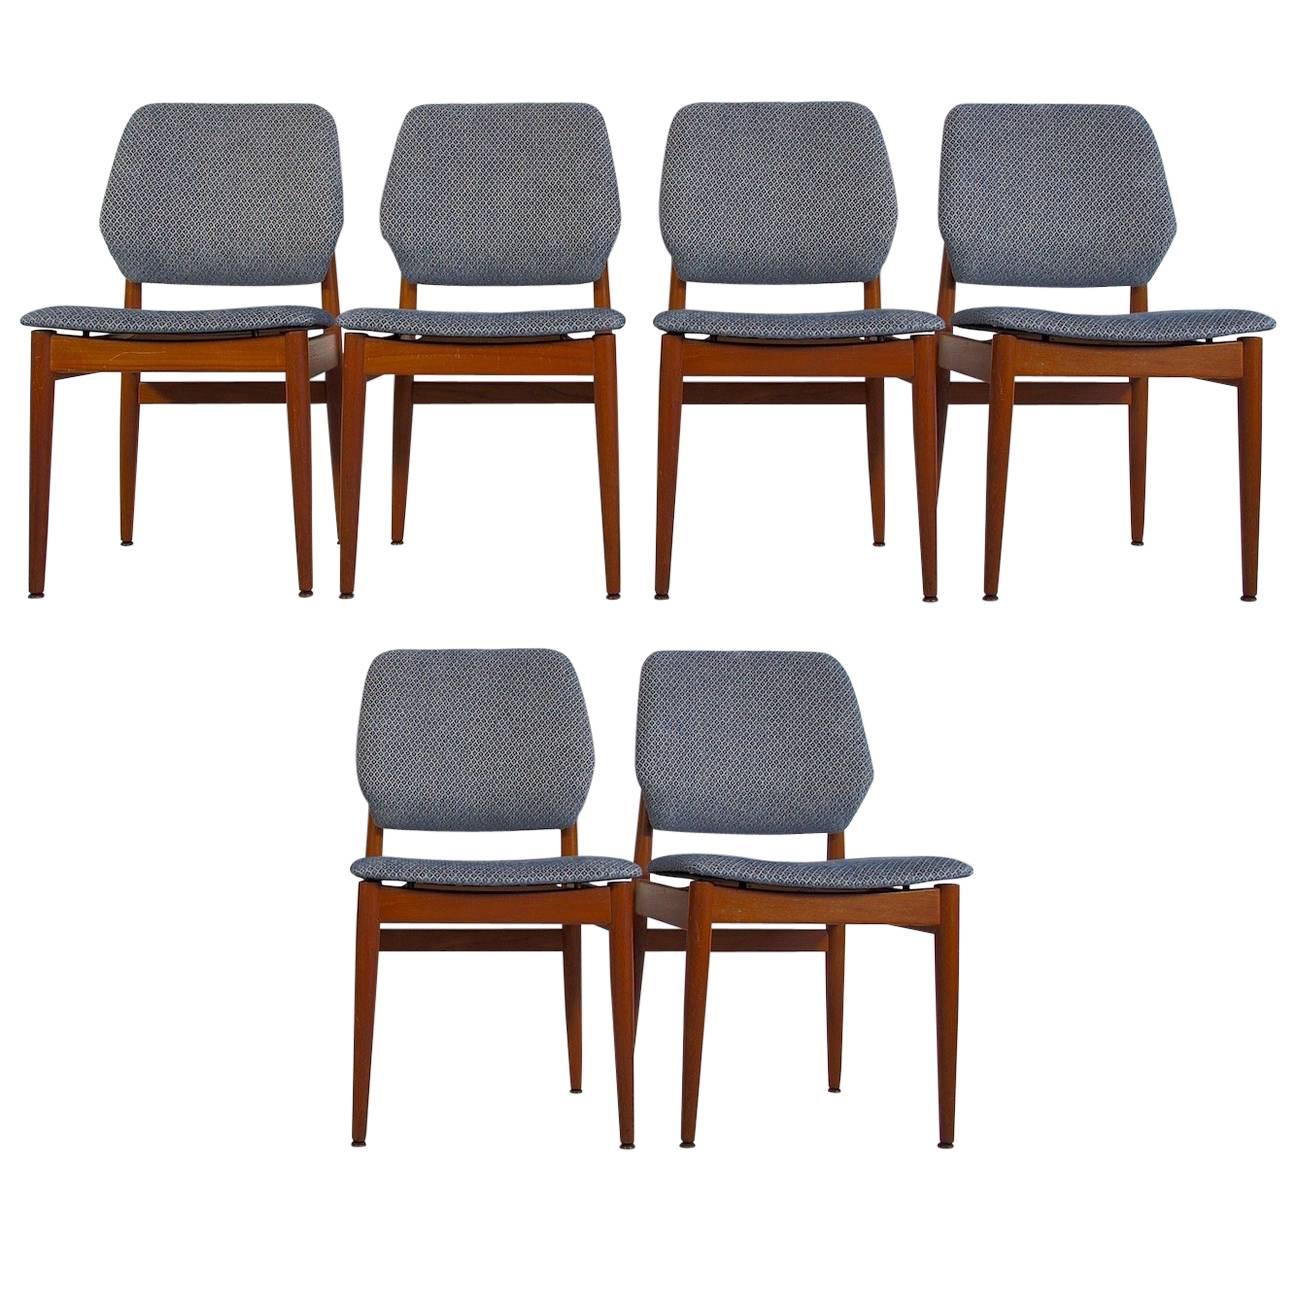 Set of Six Mid-Century Modern Casala Chairs with Teak Frame